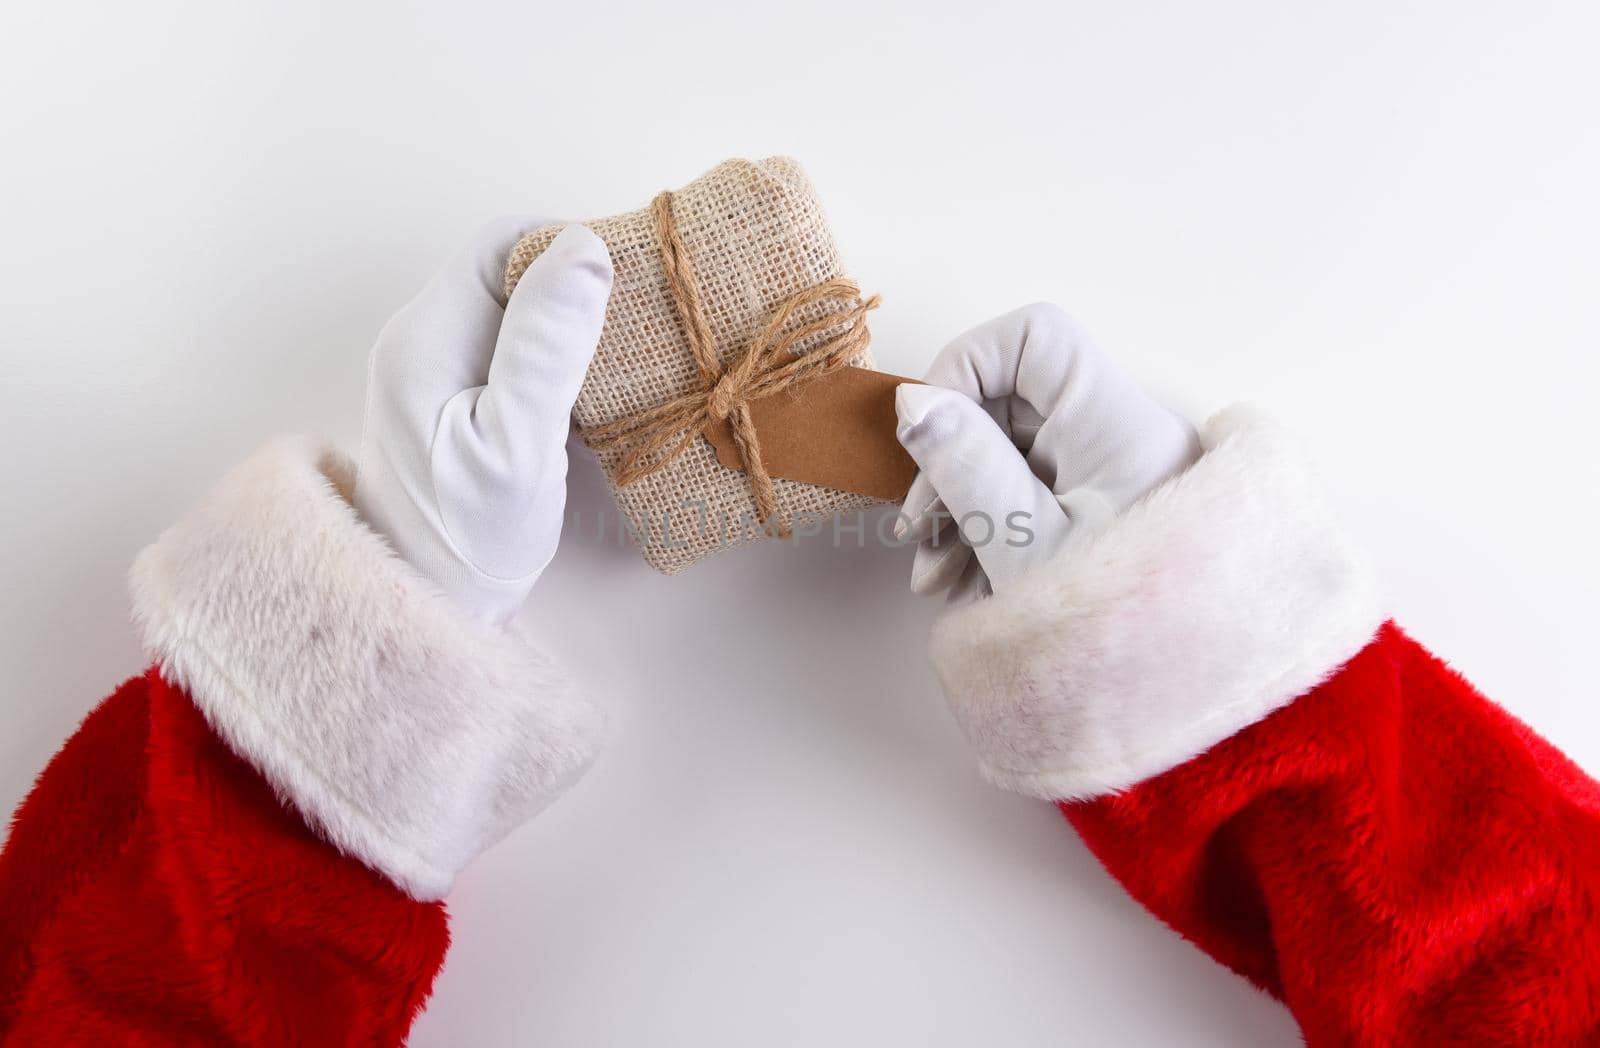 Overhead shot of Santa Claus hands holding a fabric wrapped Christmas Present with a blank gift tag.